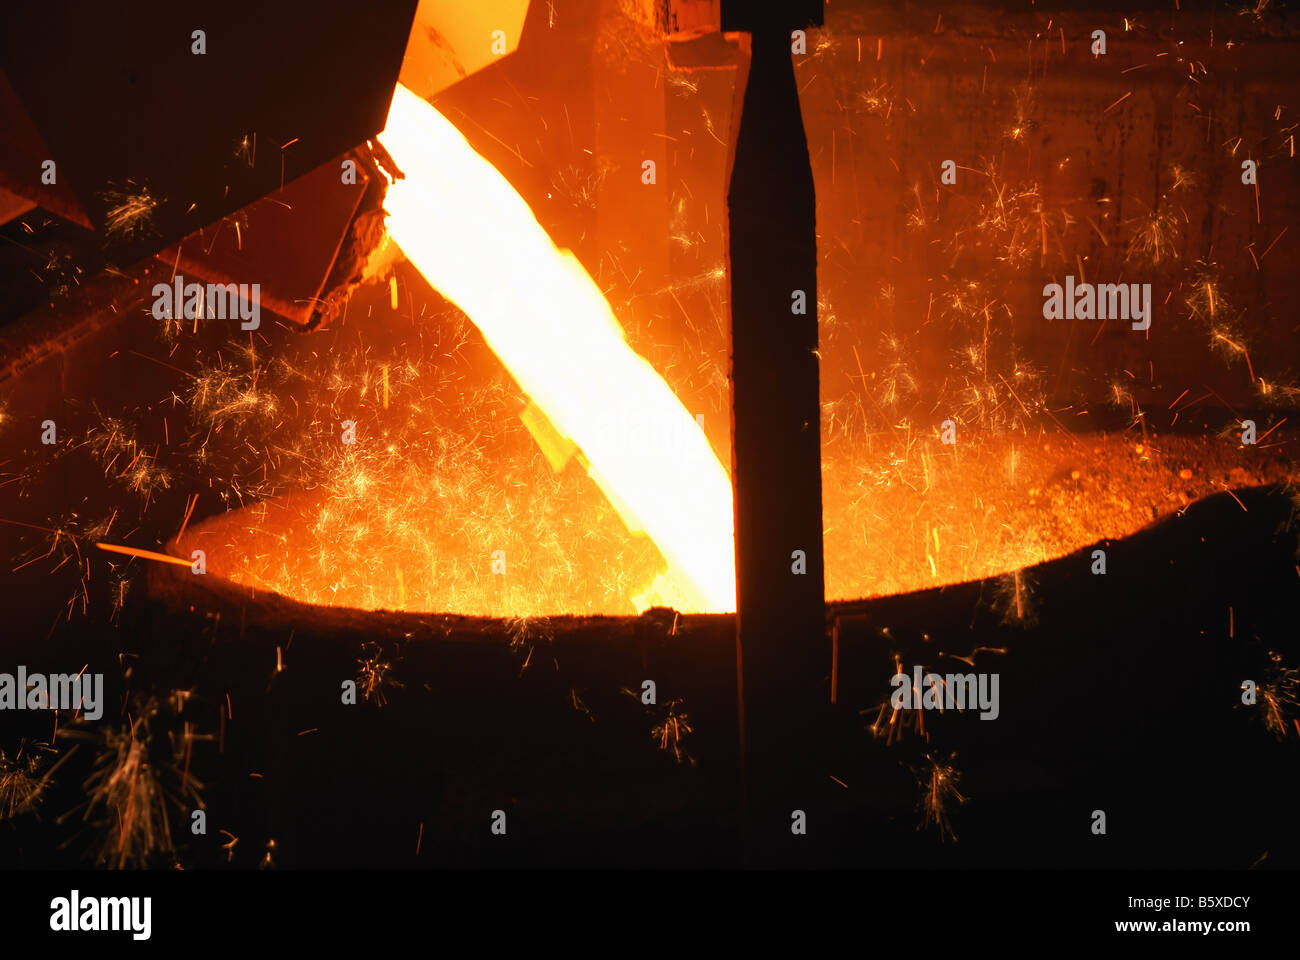 smelting of the metal in the foundry Stock Photo